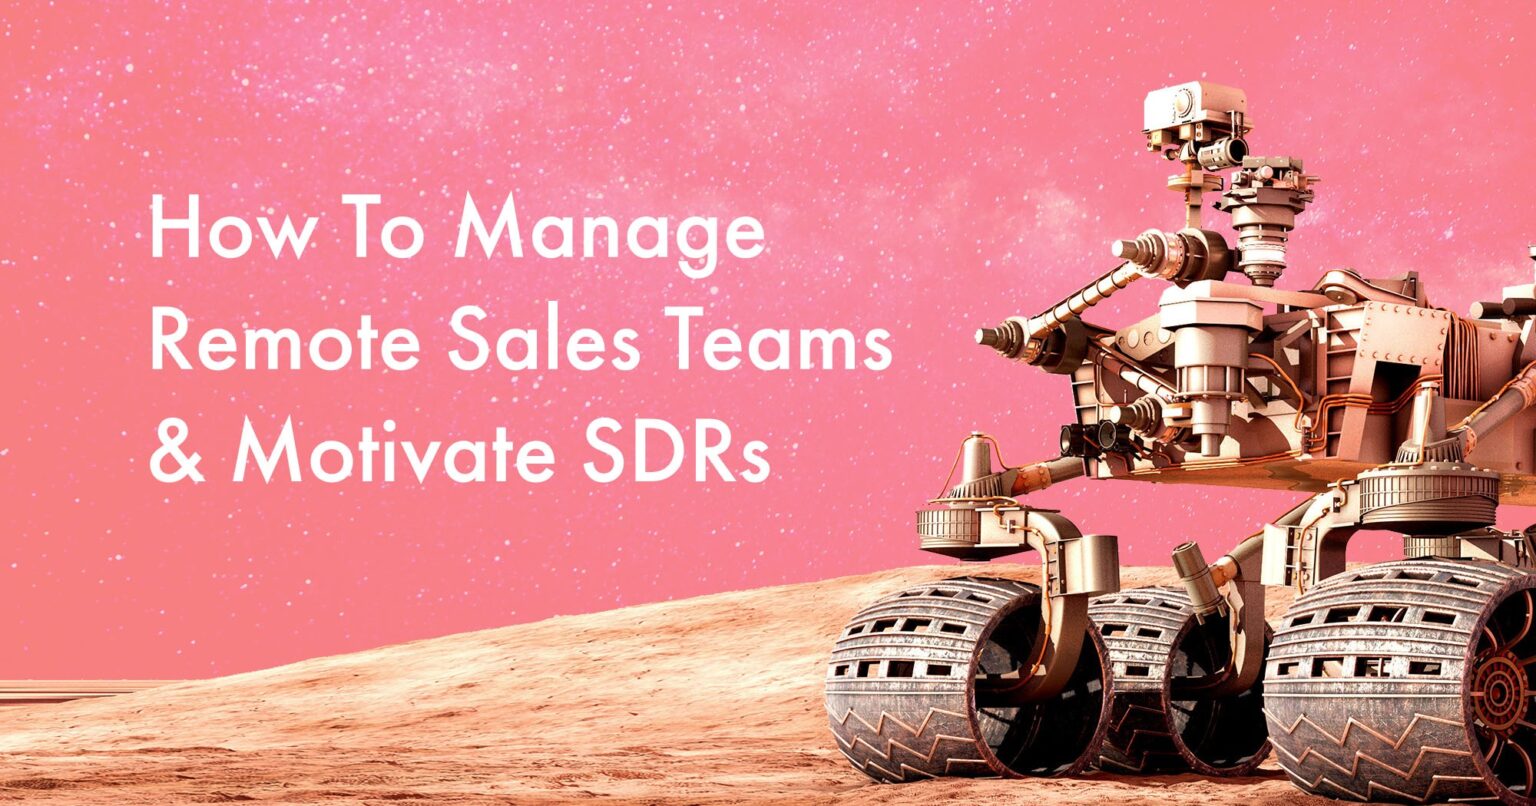 How To Manage Remote Sales Teams and Motivate SDRs